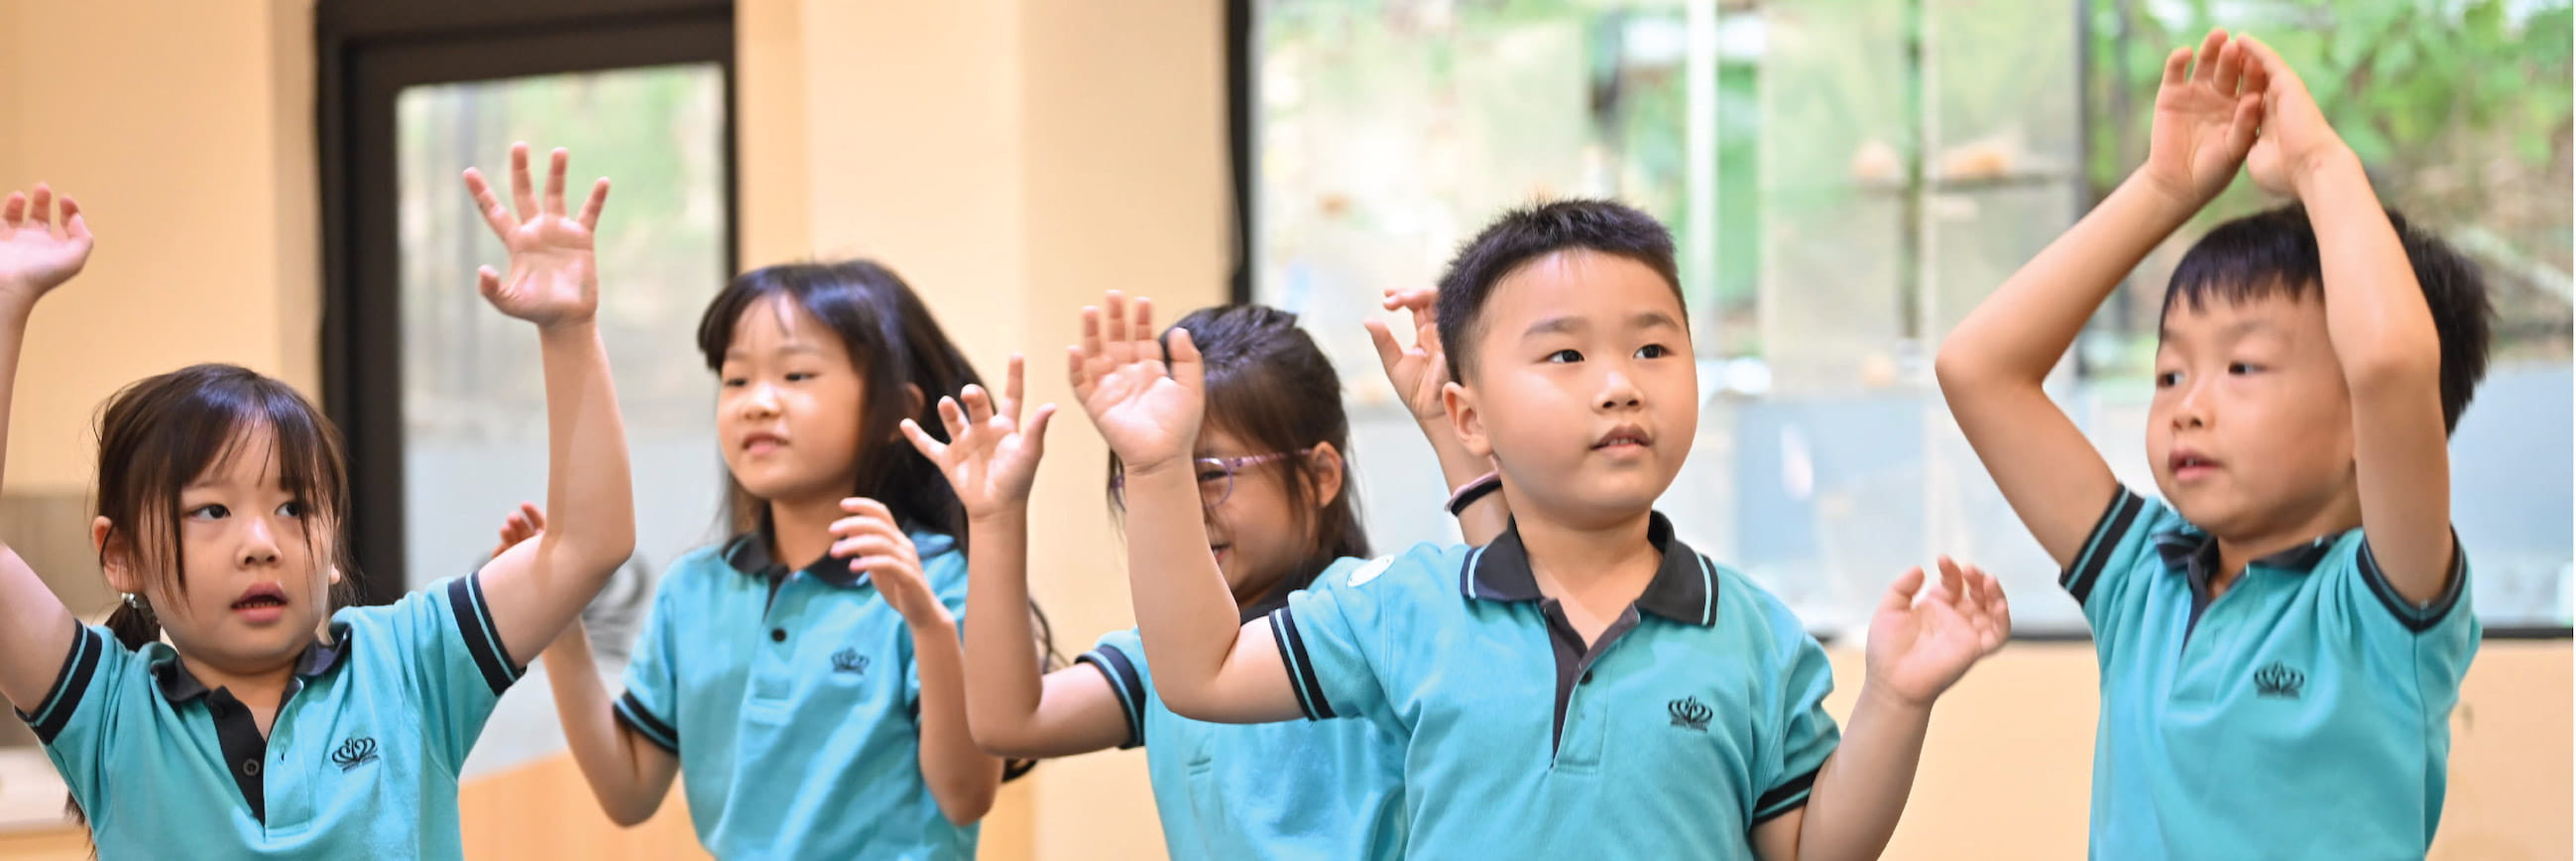 Our Values | The British School of Guangzhou - Content Page Header